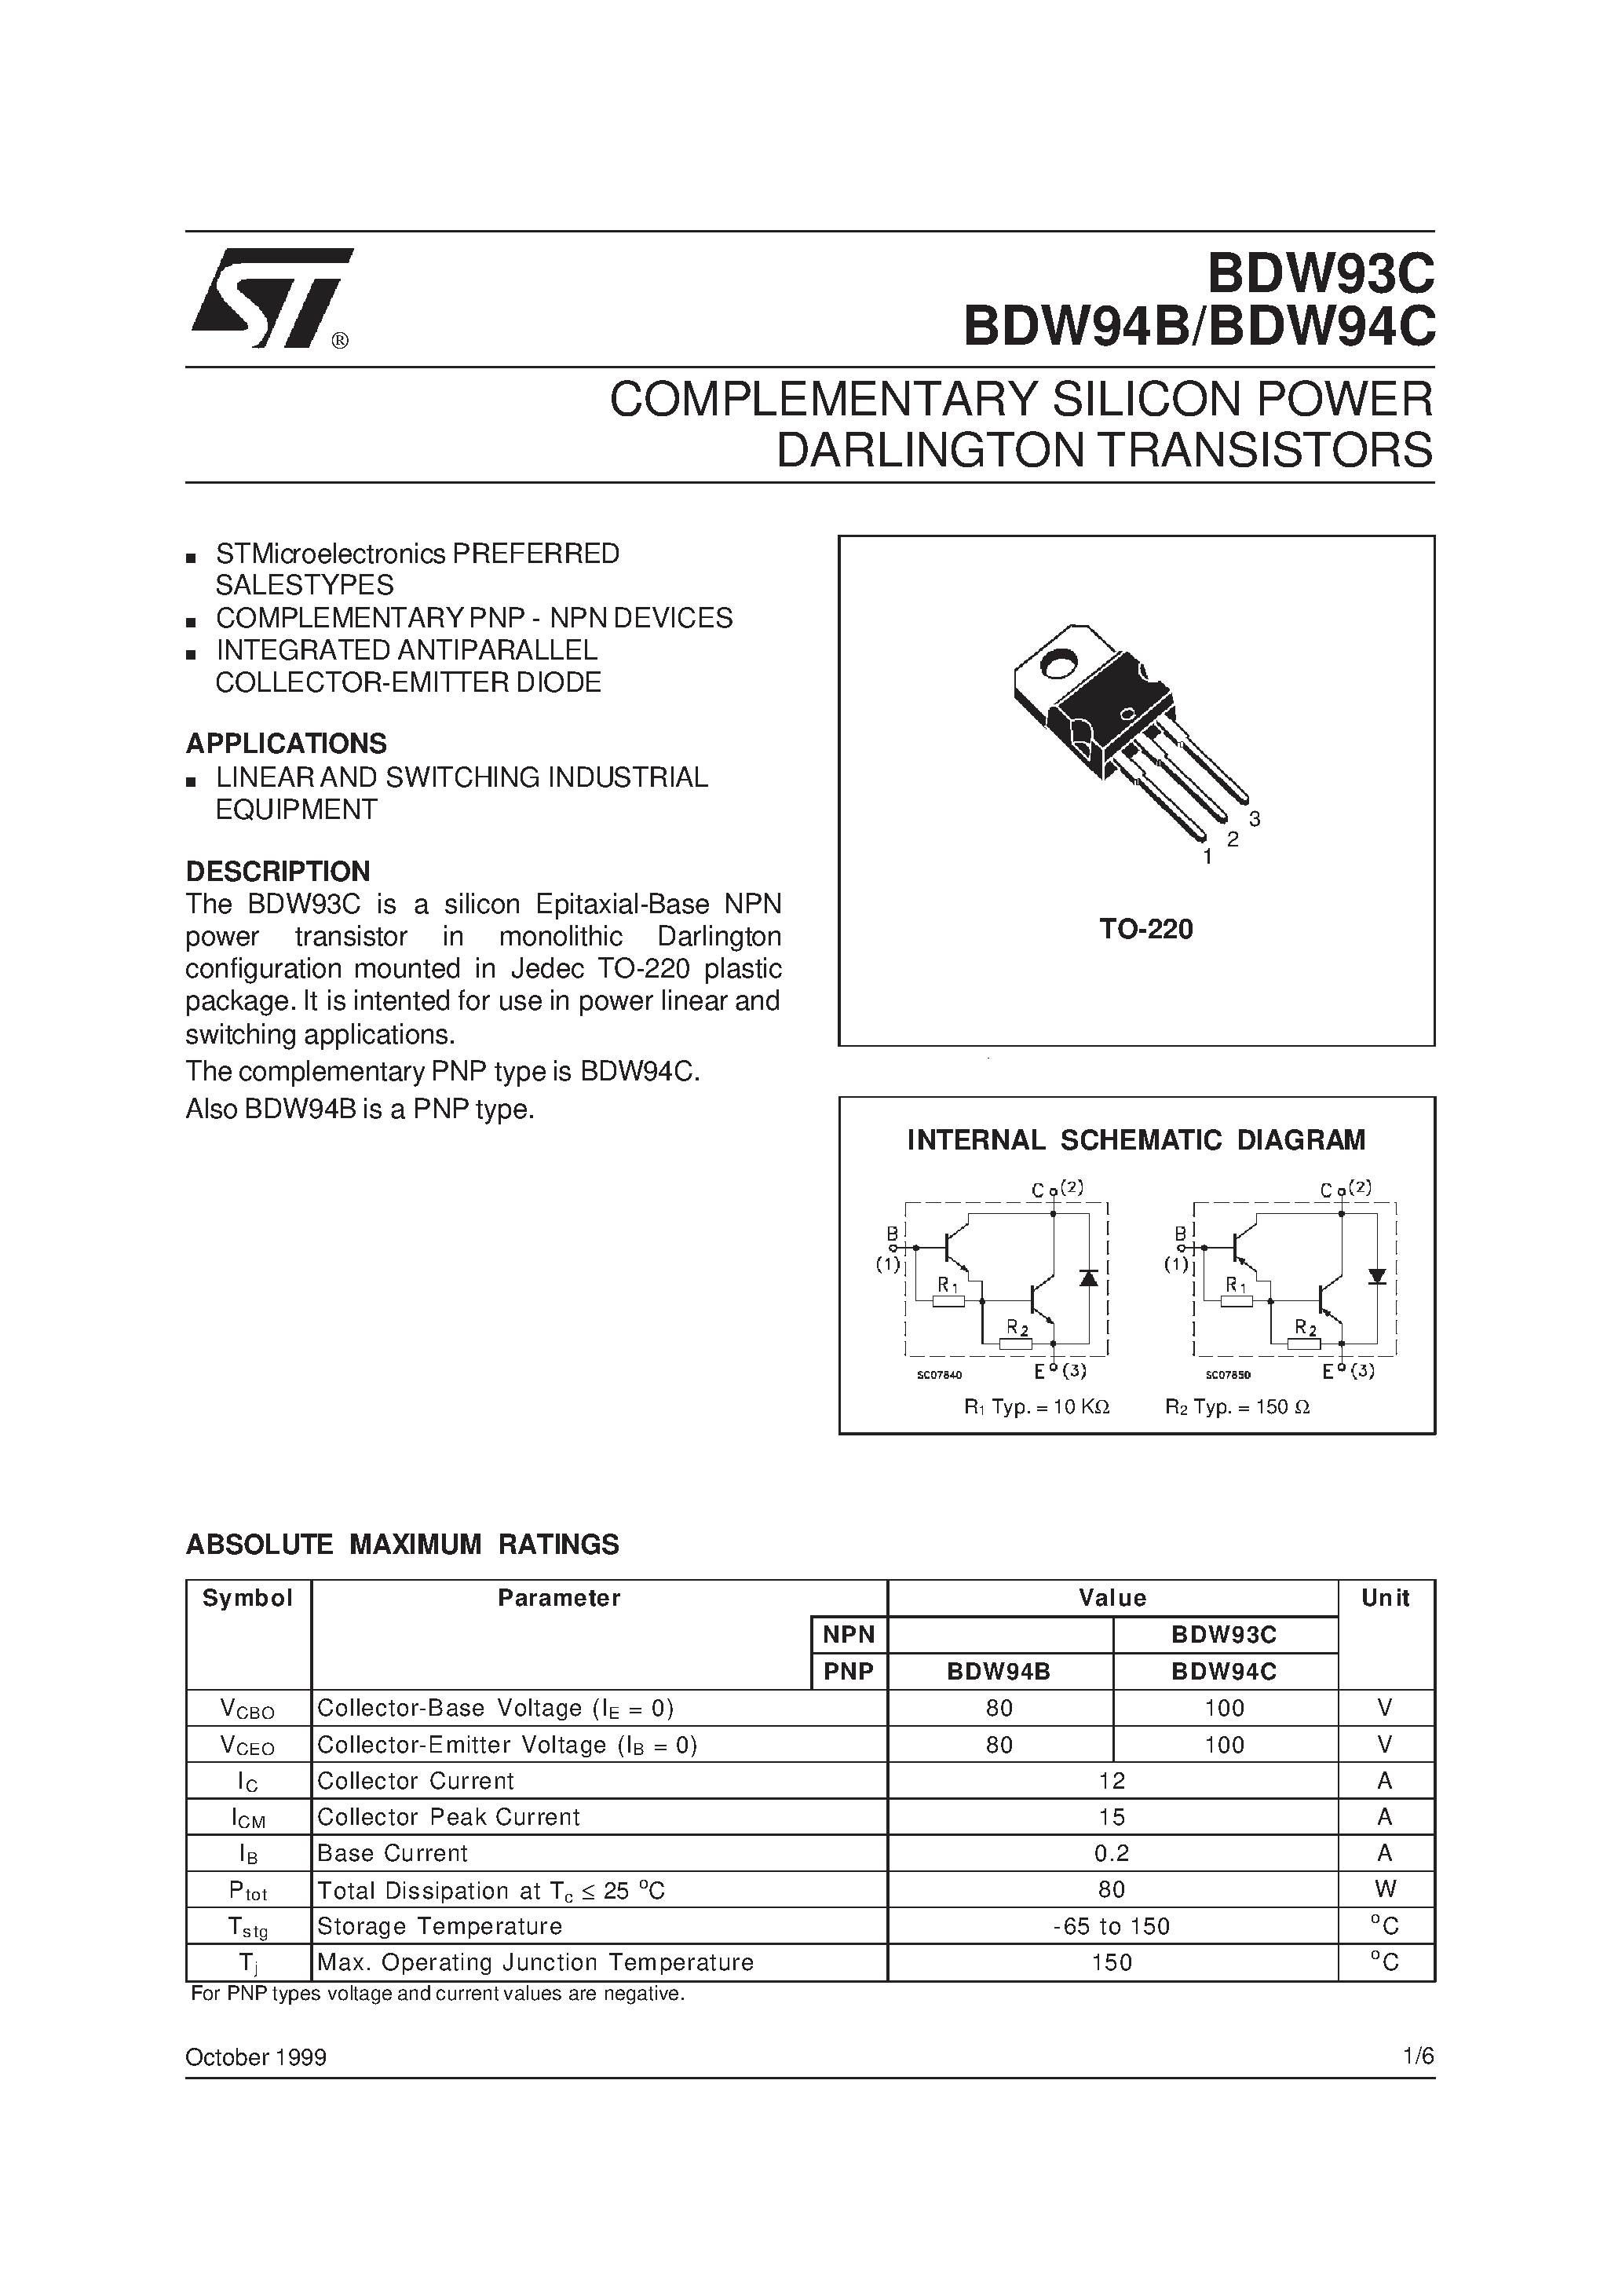 Datasheet BDW94C - COMPLEMENTARY SILICON POWER DARLINGTON TRANSISTORS page 1